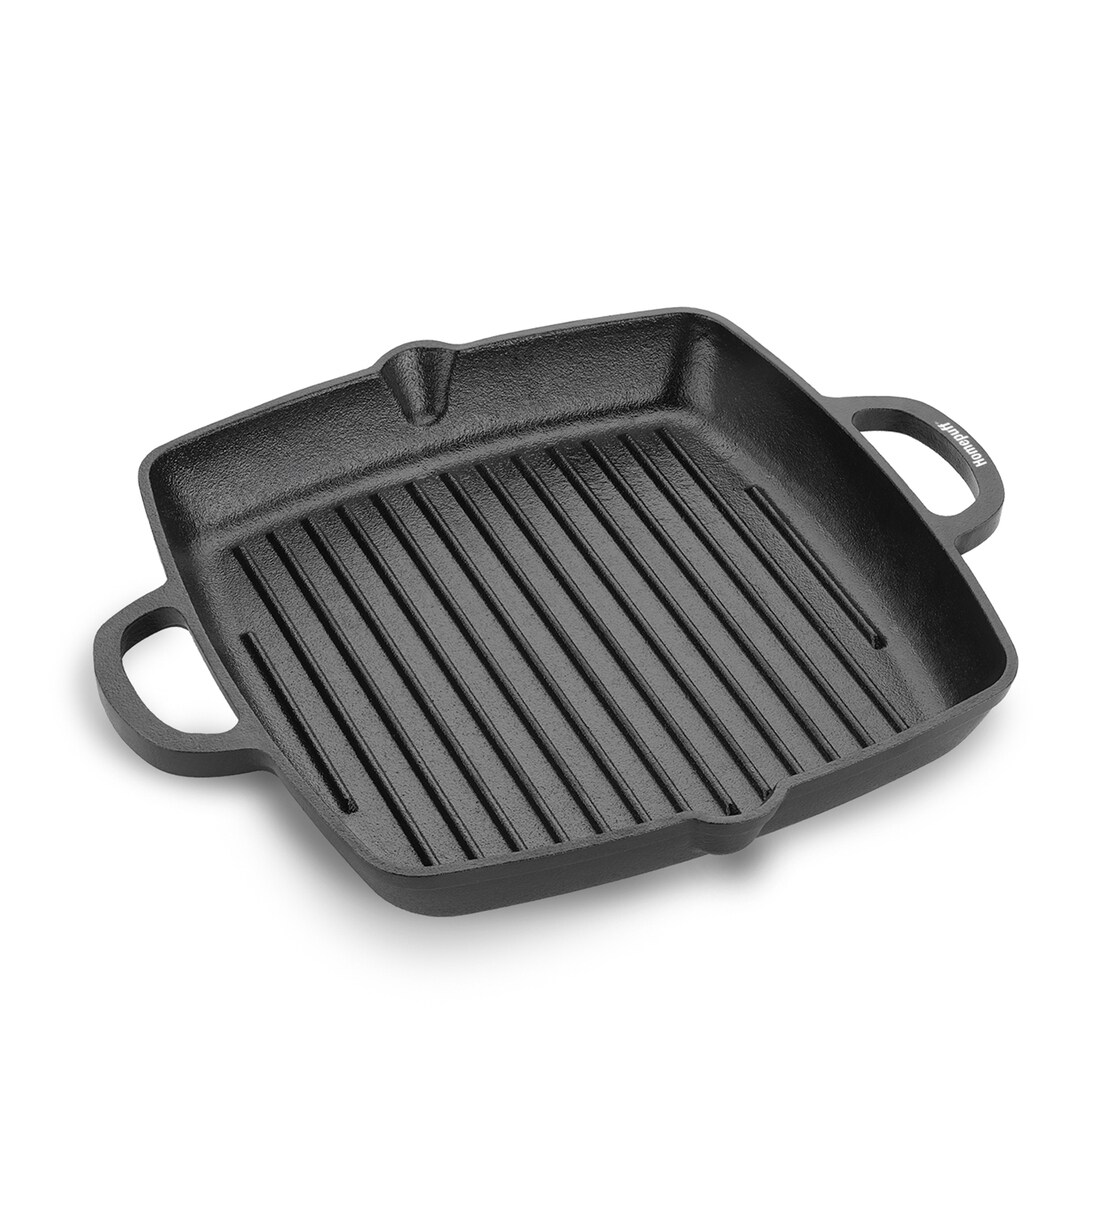 Buy Black Cast Iron Grill Pan By Homepuff At 62 Off By Homepuff Pepperfry 